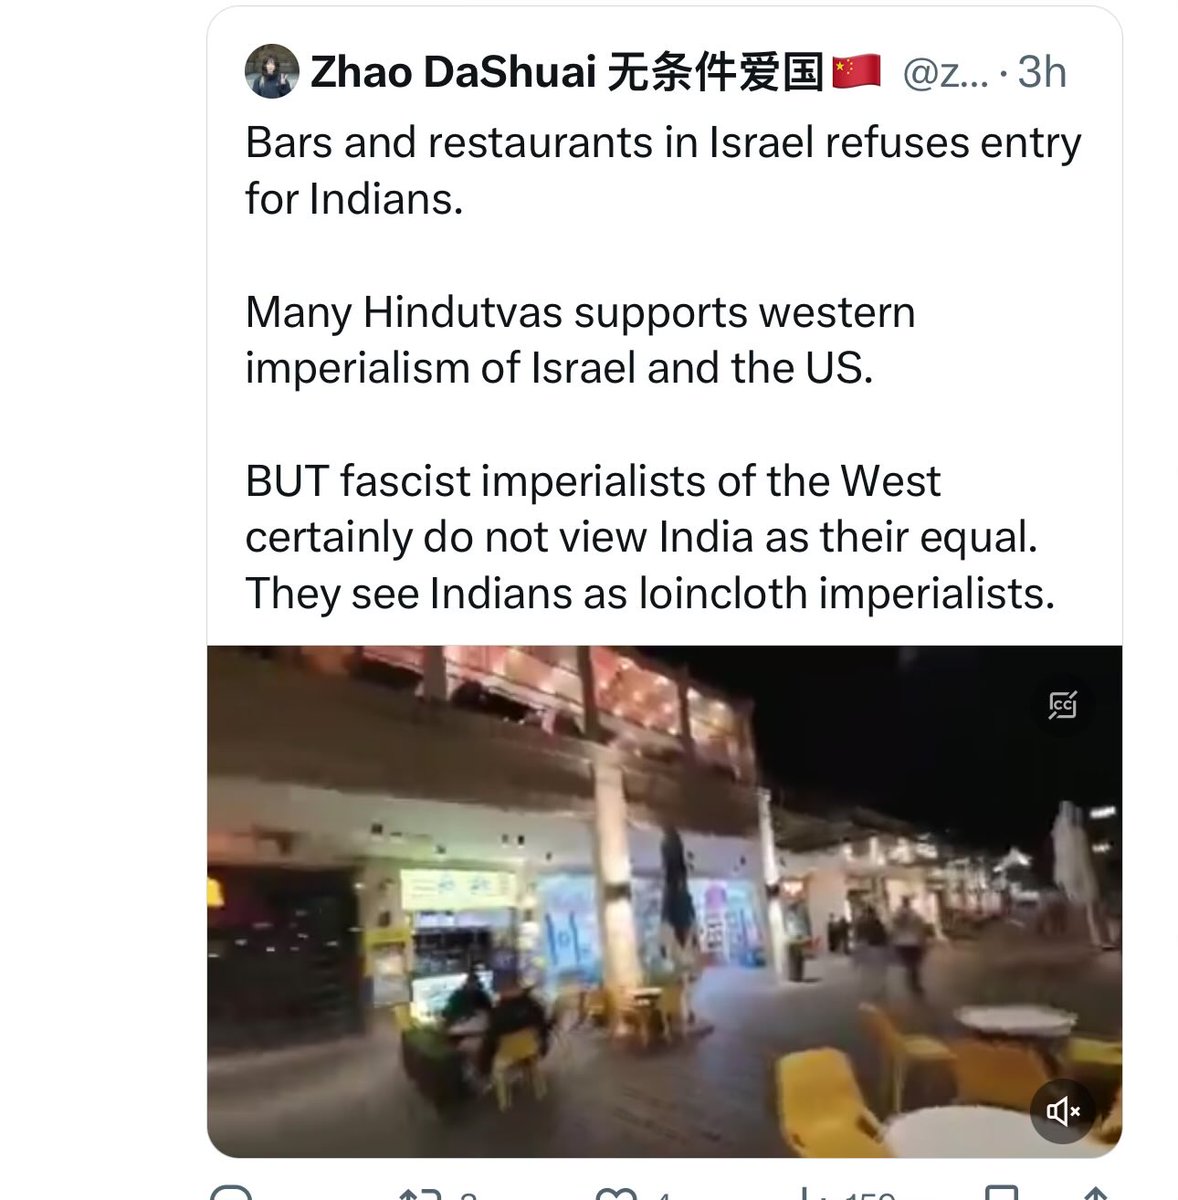 Just in - After Jehadis ,China also supports Neutral 'Hindus ' . That's some neutrality man.